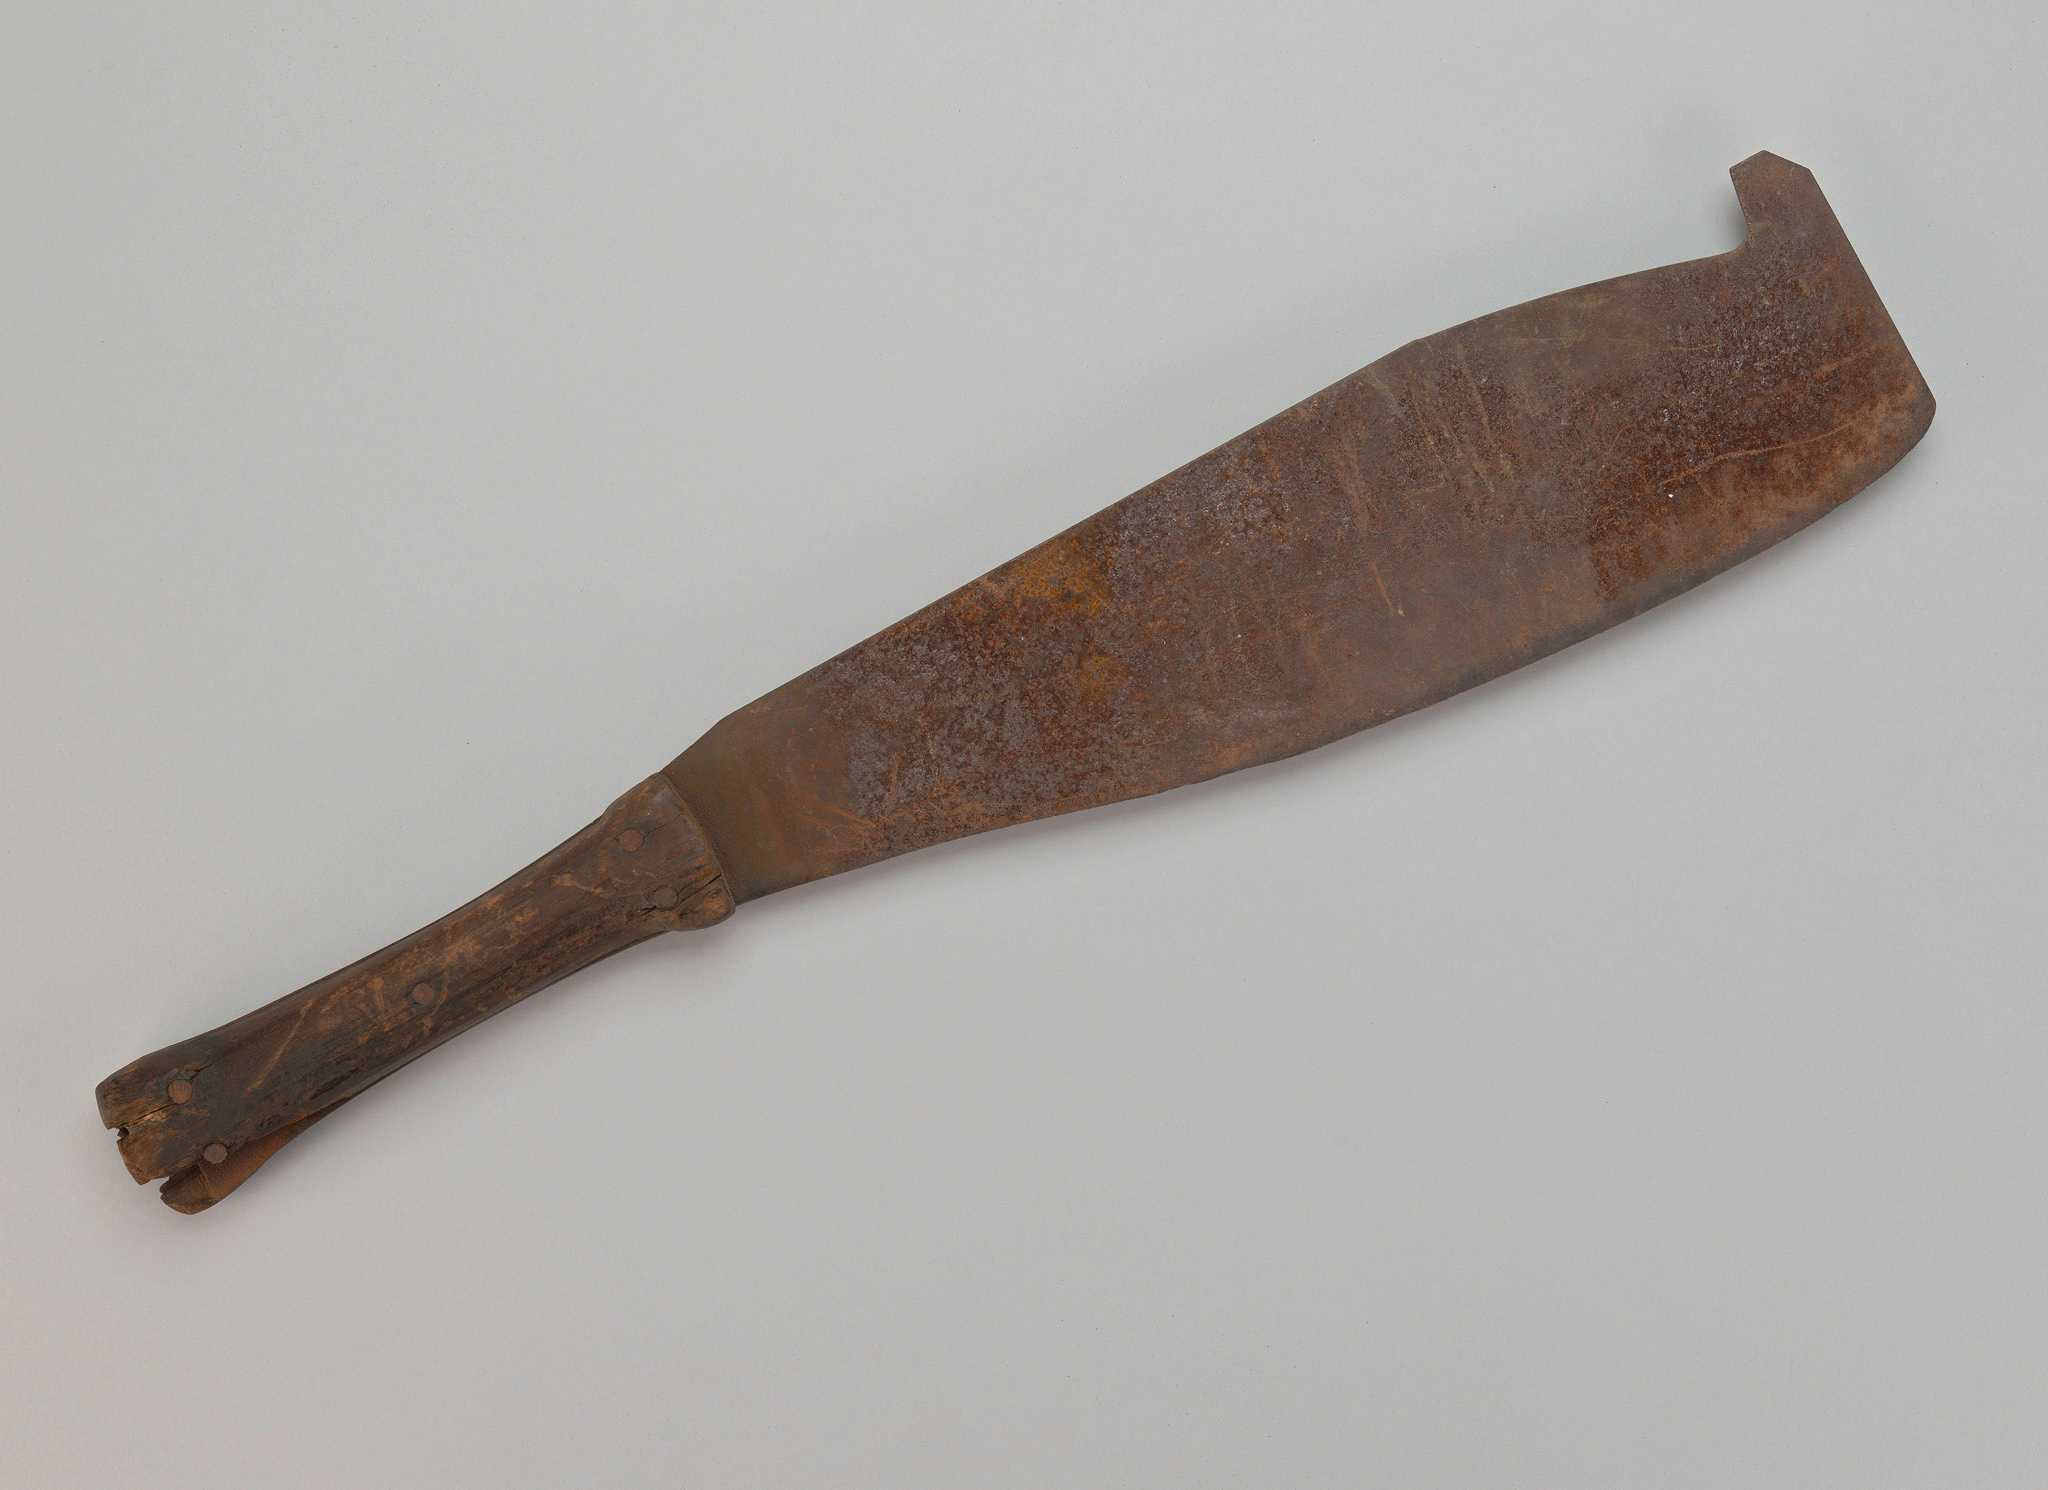 A short-handled sugar cane cutter with metal blade and wood handle. The metal blade is flat and wide at the head, tapering slightly towards the hilt. There is a hook protruding from the widest portion of the head of the blade. There are four metal nails in the wood handle. There are fragments of wood missing from the butt of the handle, exposing parts of the nails.